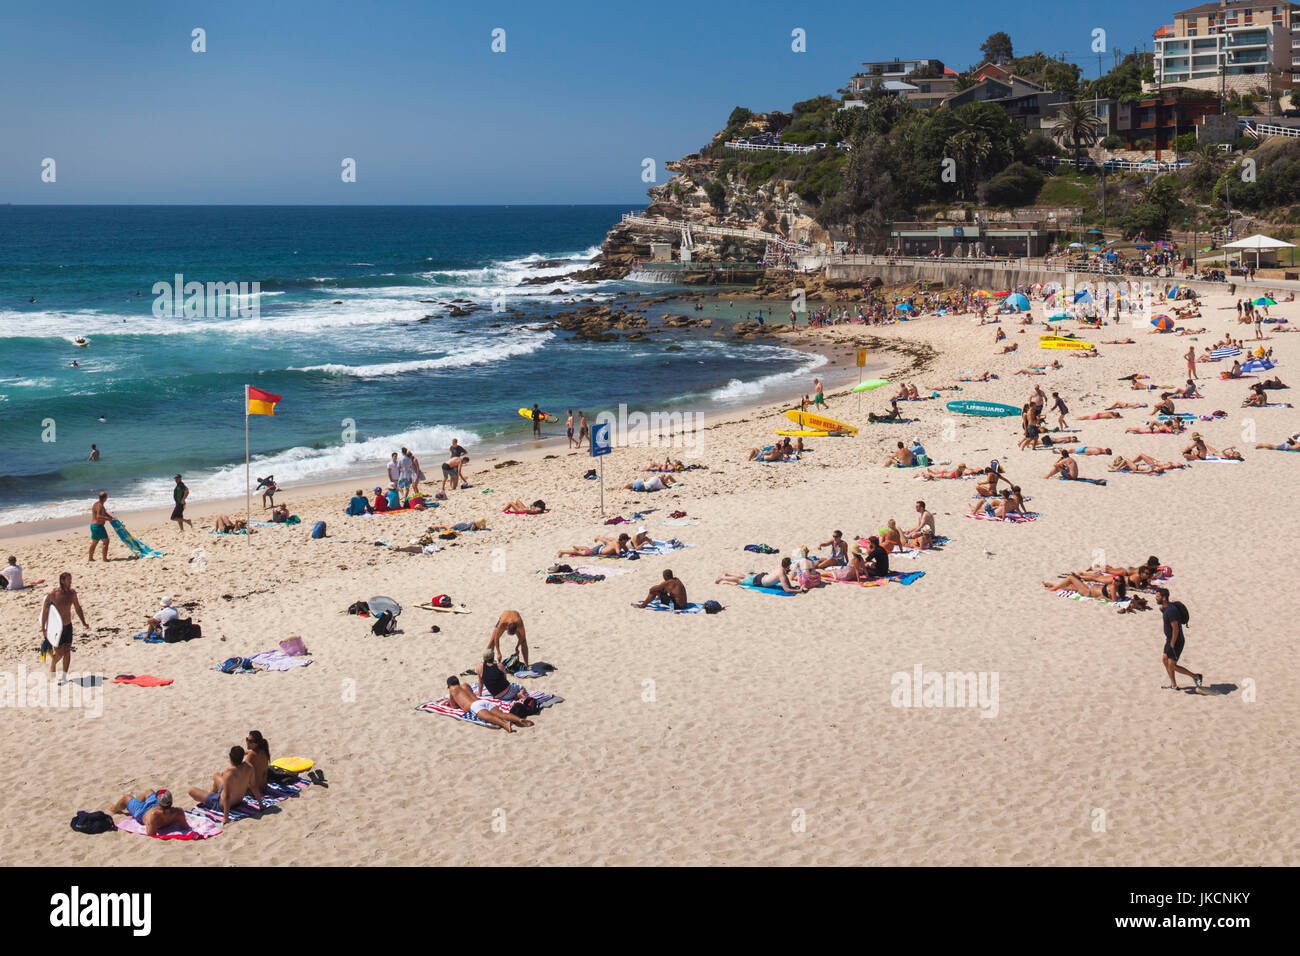 Australia, New South Wales, NSW, Sydney, Bronte, Bronte Beach, elevated view Stock Photo